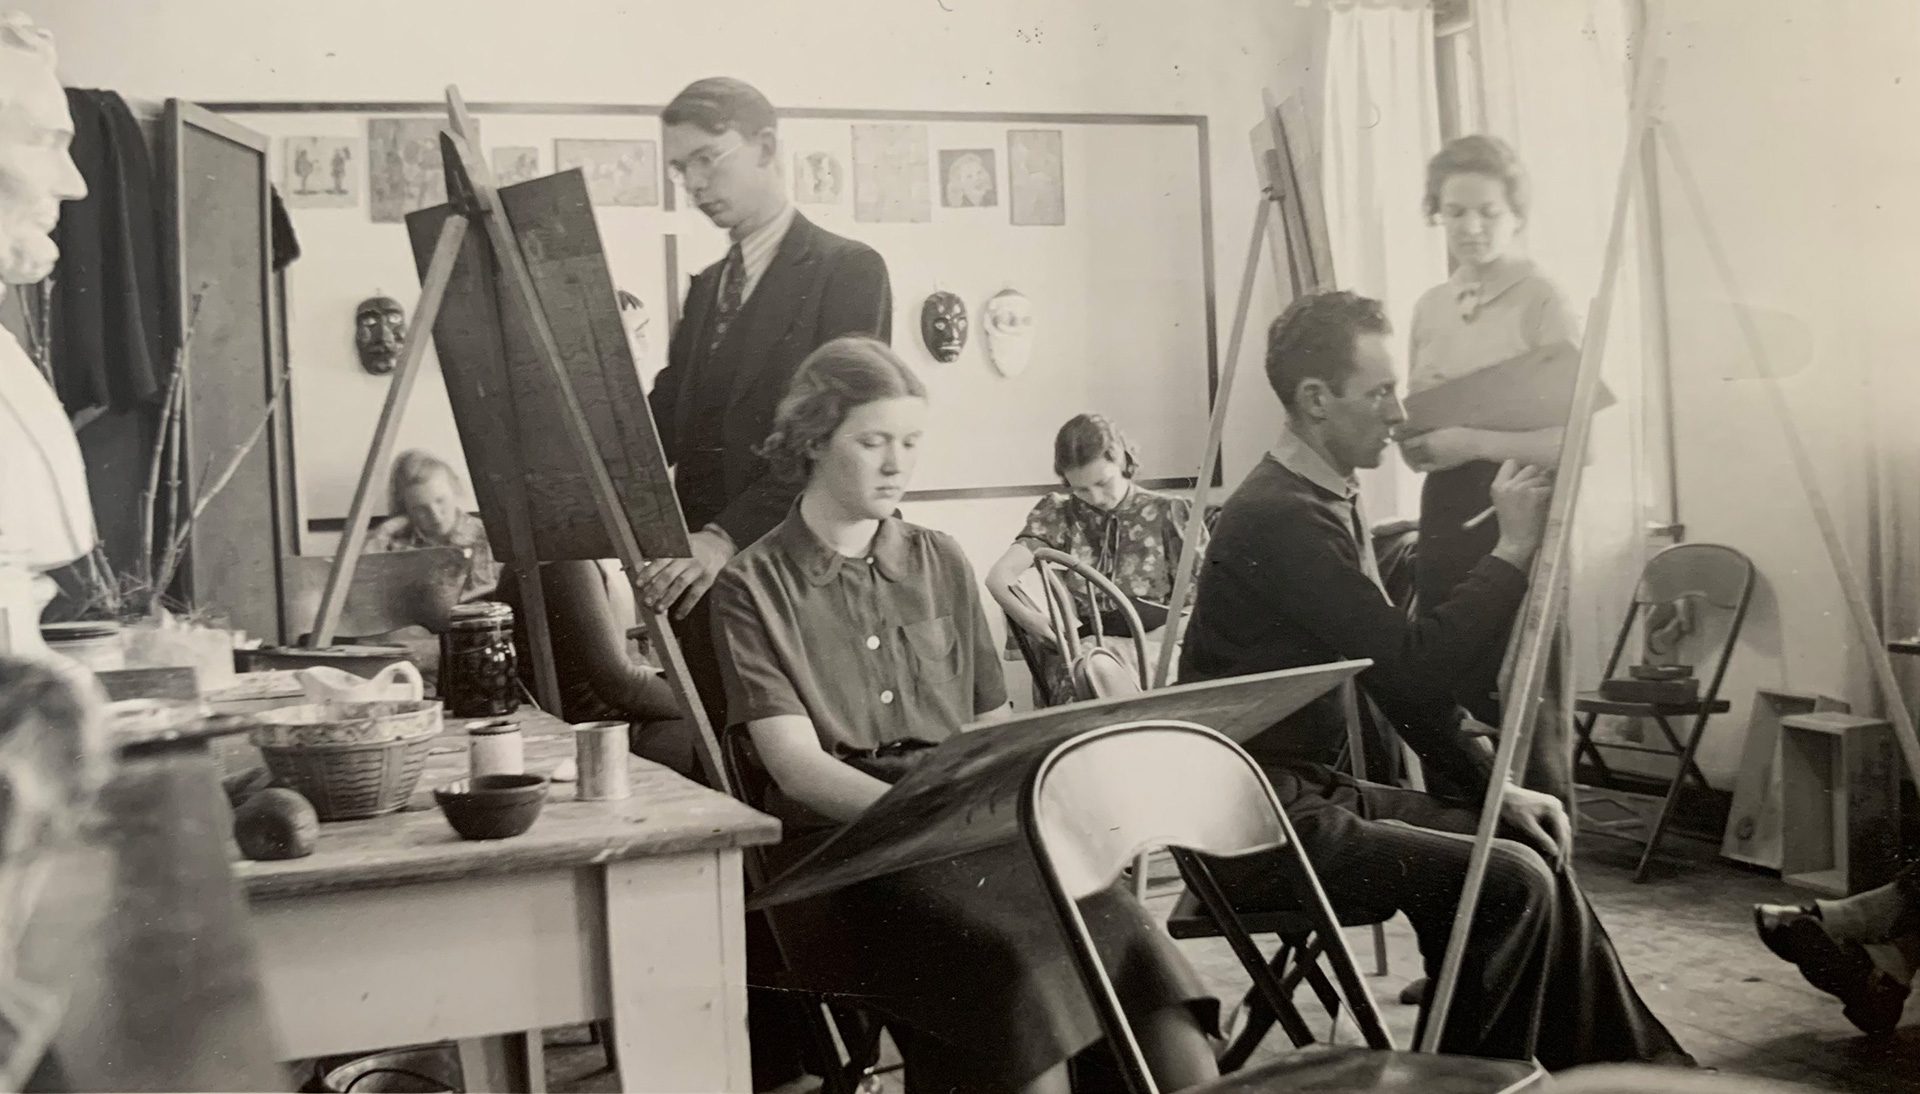 Historic black and white photo of members of the Ortlip family painting.